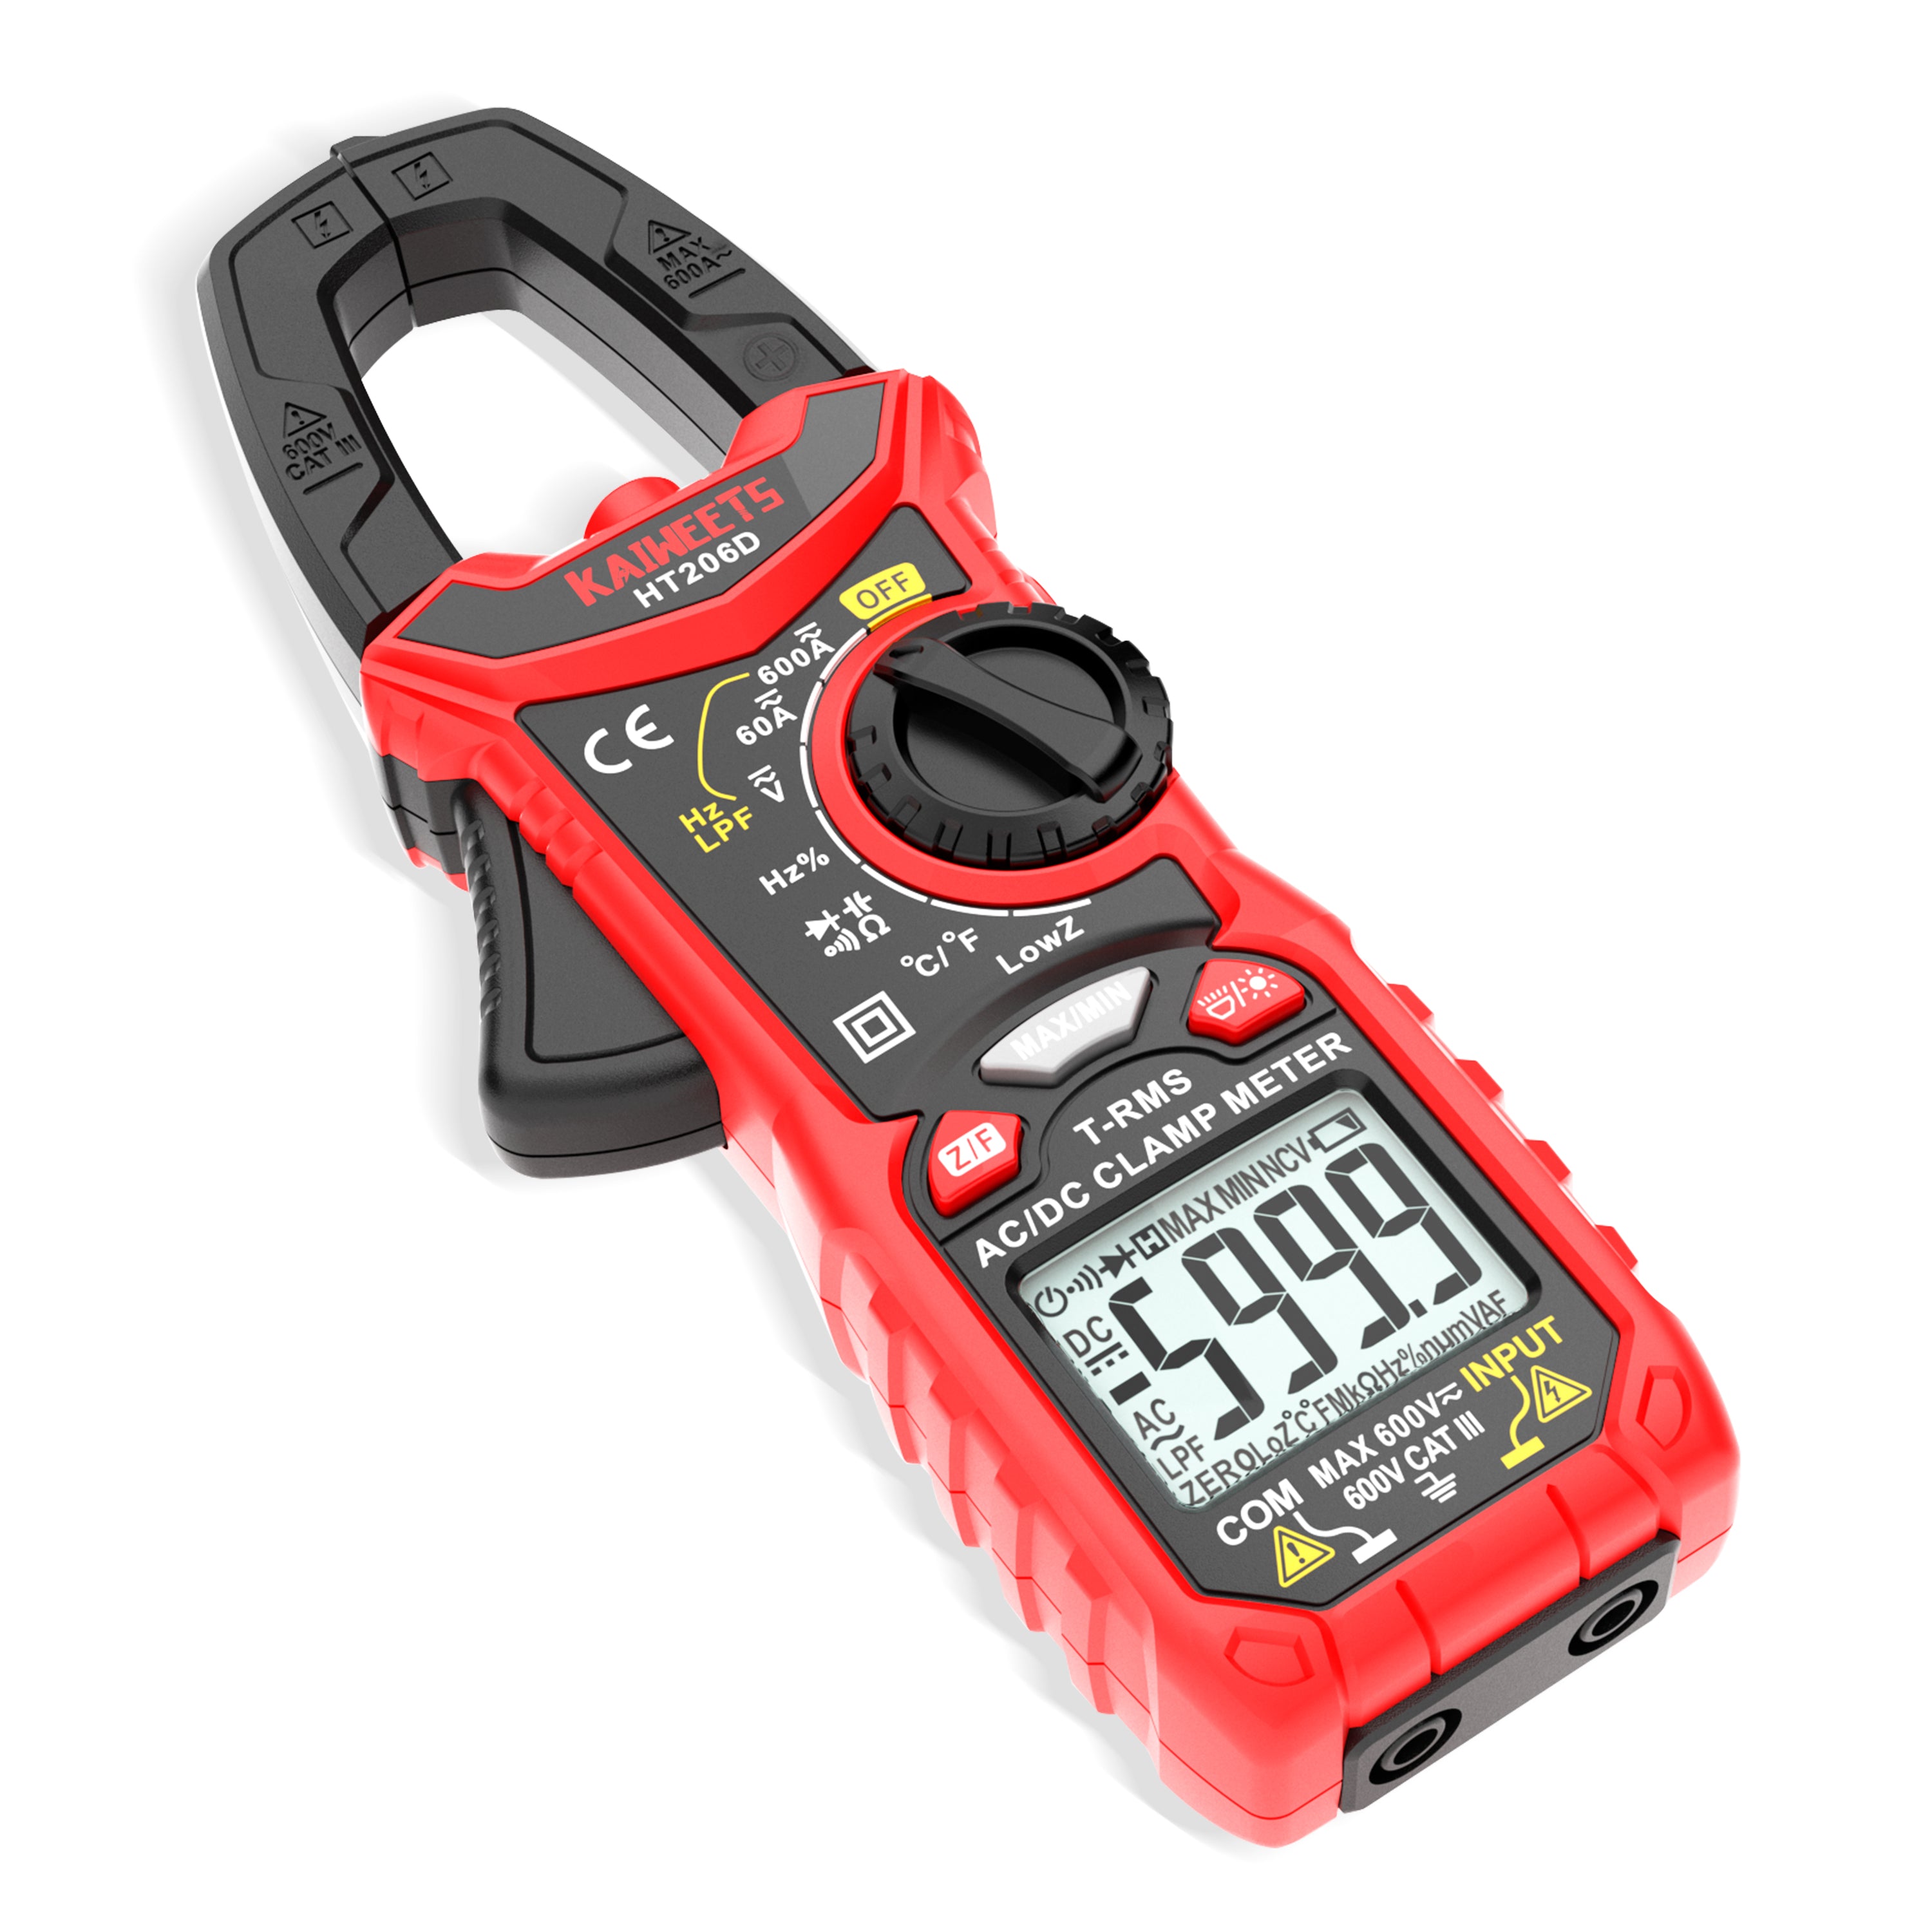 HT206D Digital Clamp Meter T-RMS 6000 Counts, Multimeter Voltage Tester Auto-ranging, Measures Current Voltage Temperature Capacitance Resistance Diodes Continuity Duty-Cycle (AC/DC Current)